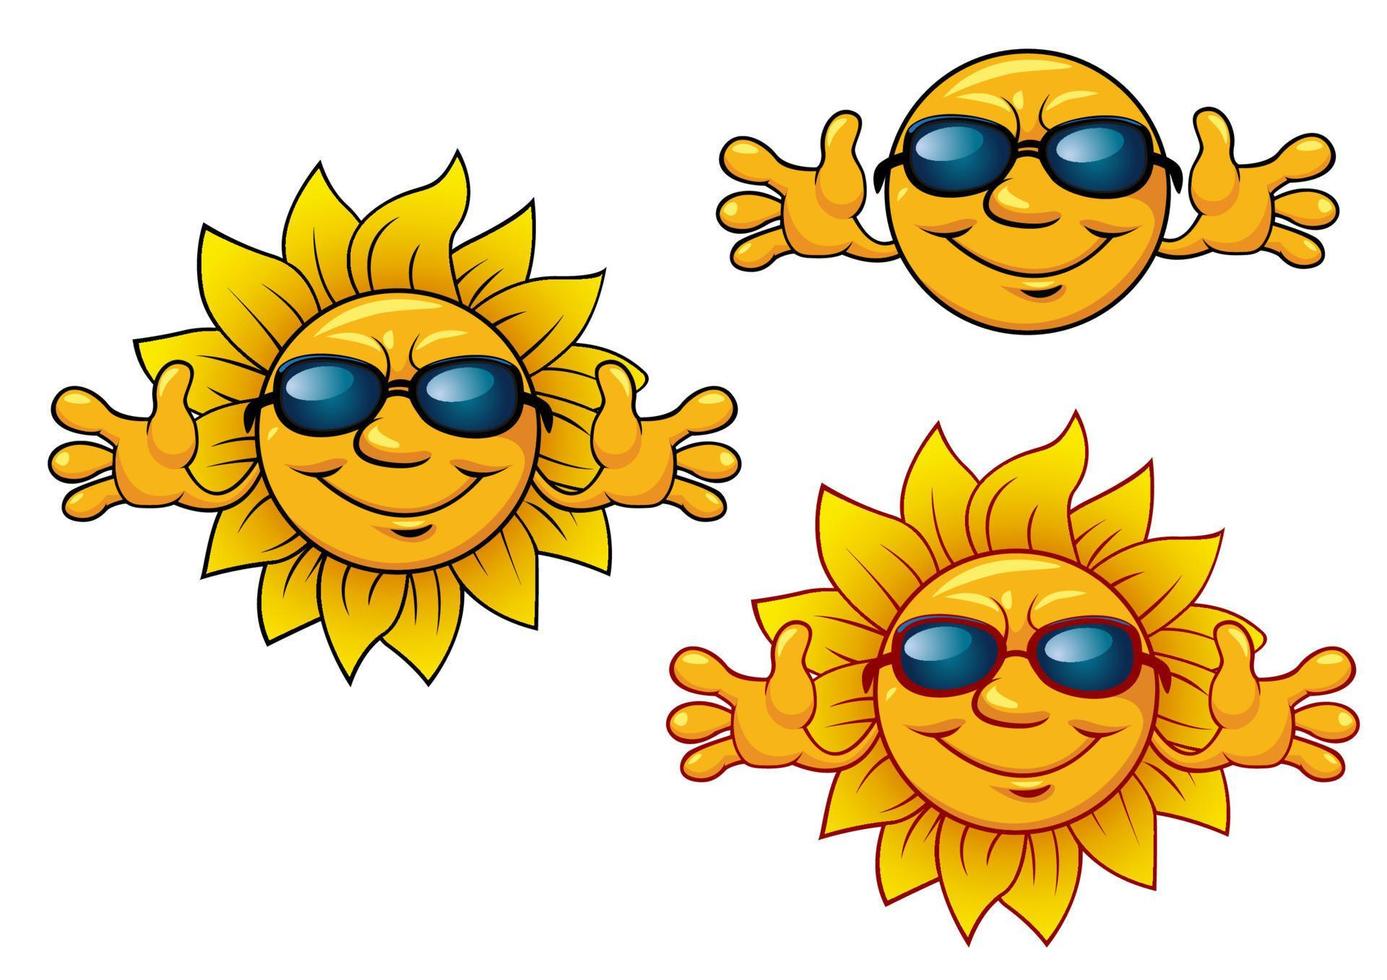 Cartoon smiling sun characters with sunglasses vector